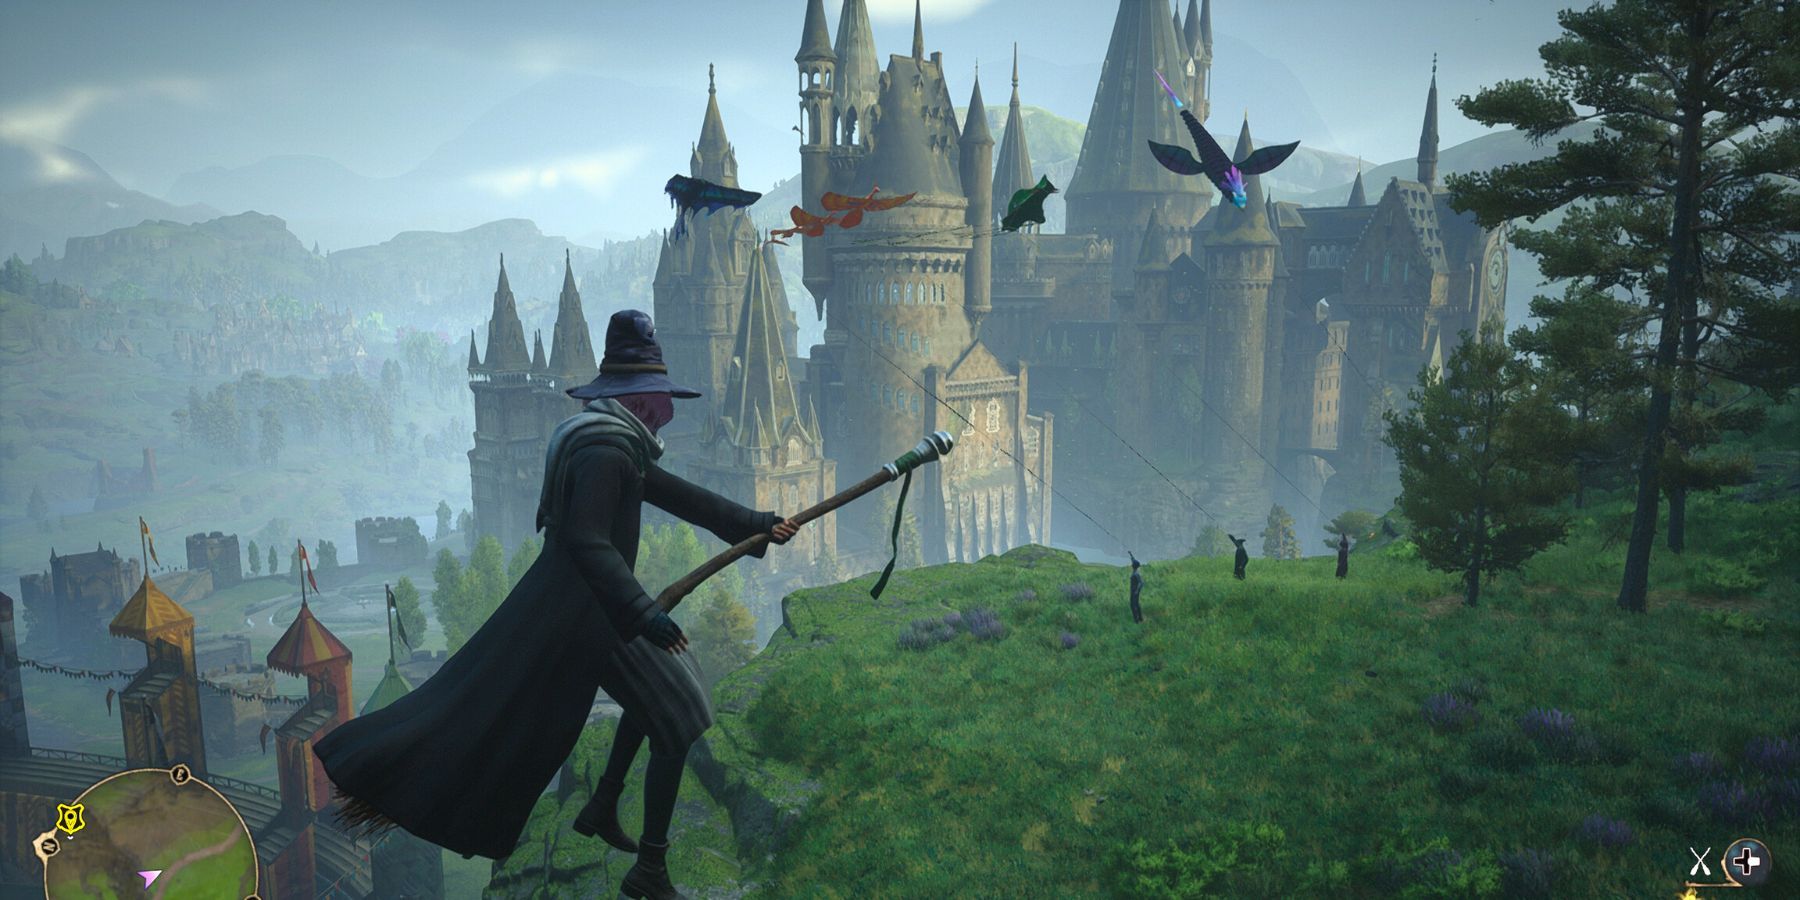 Broom flying by the kite flyers and Quidditch pitch by Hogwarts Castle in Hogwarts Legacy